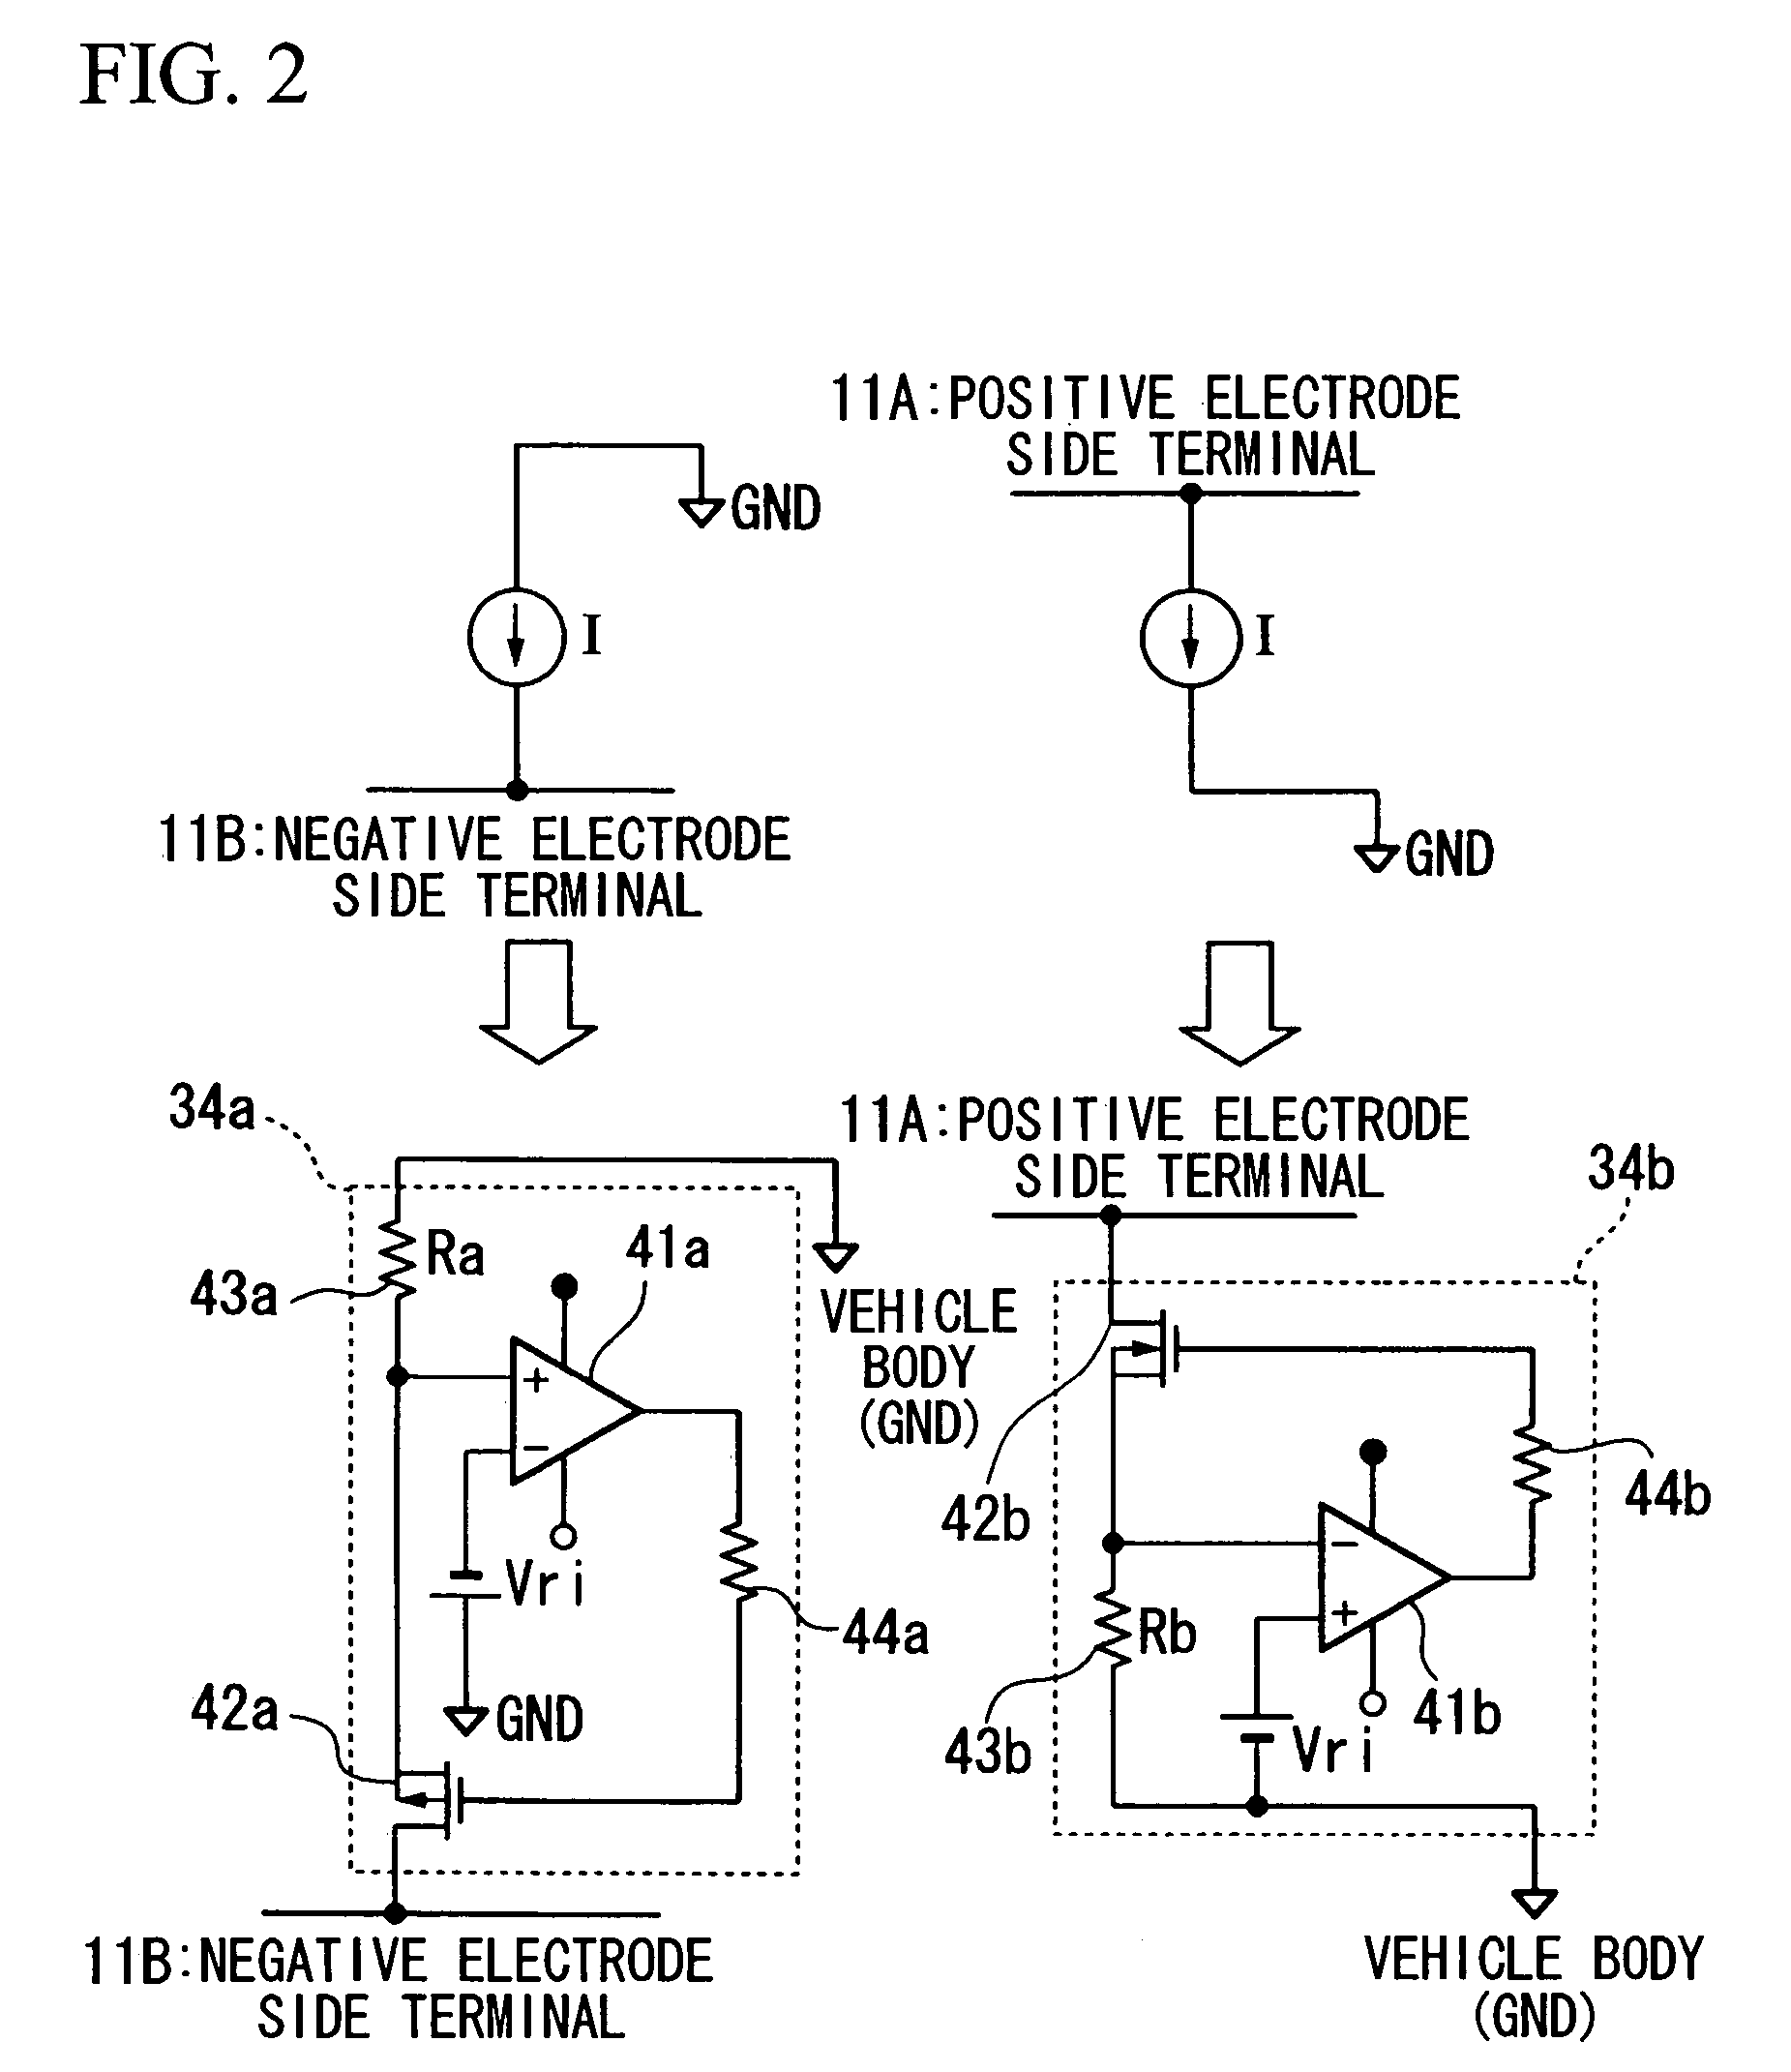 Ground fault detection device